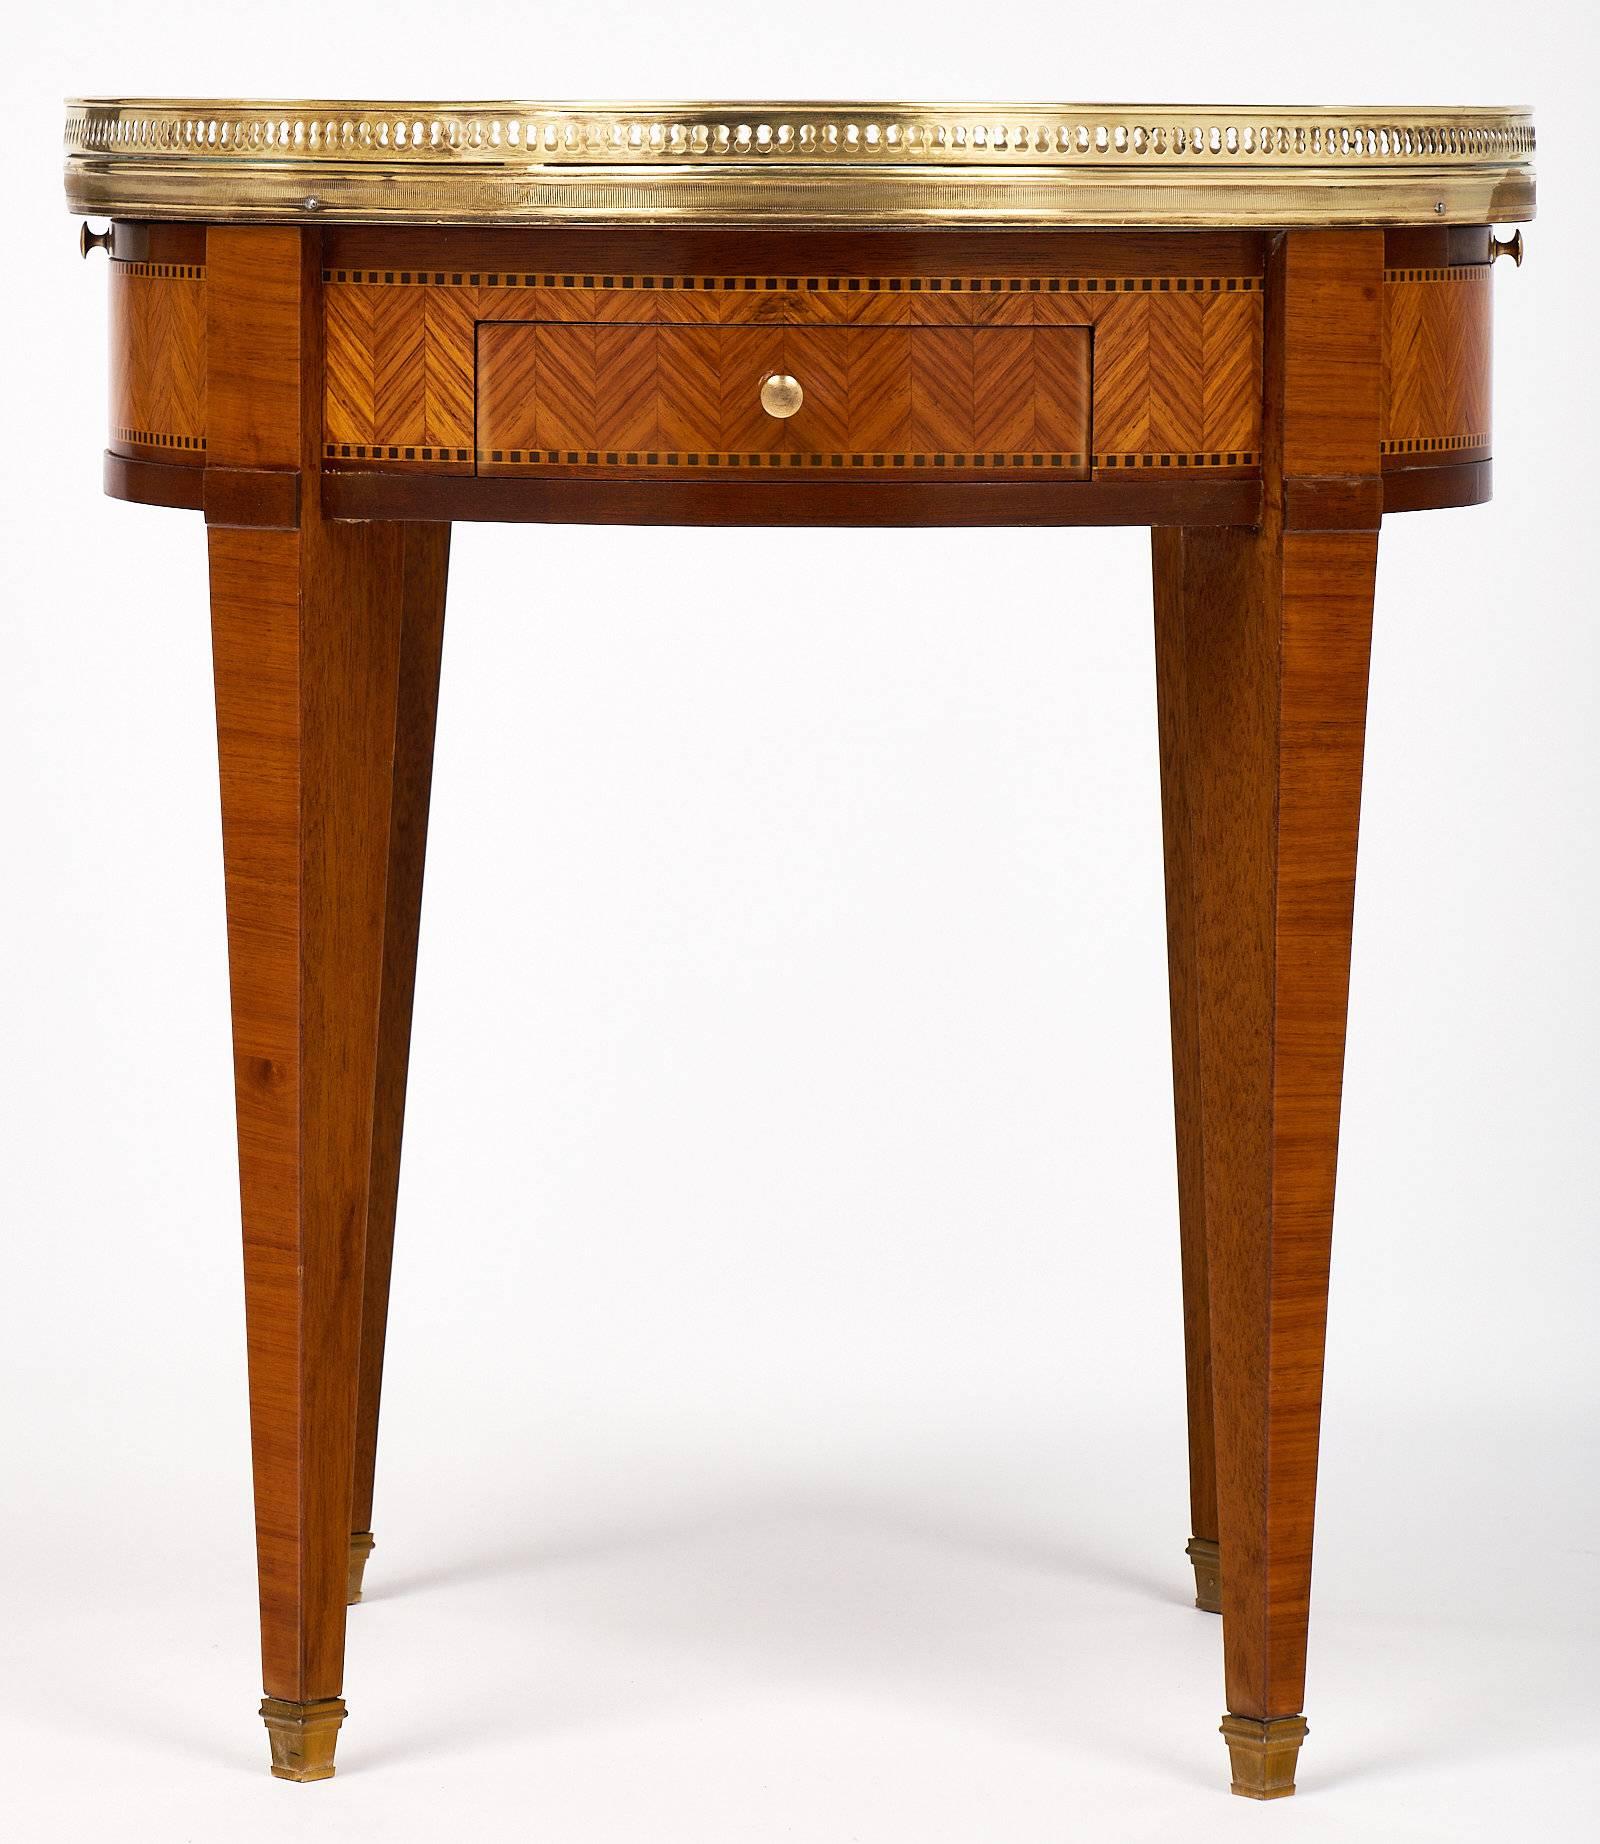 Elegant Louis XVI style bouillotte table with a fantastic Carrara marble-top and pull-out leaves. The table is made of rosewood and mahogany and features a beautiful chevron parquetry. There is a brass gallery that draws the eye to the table, and